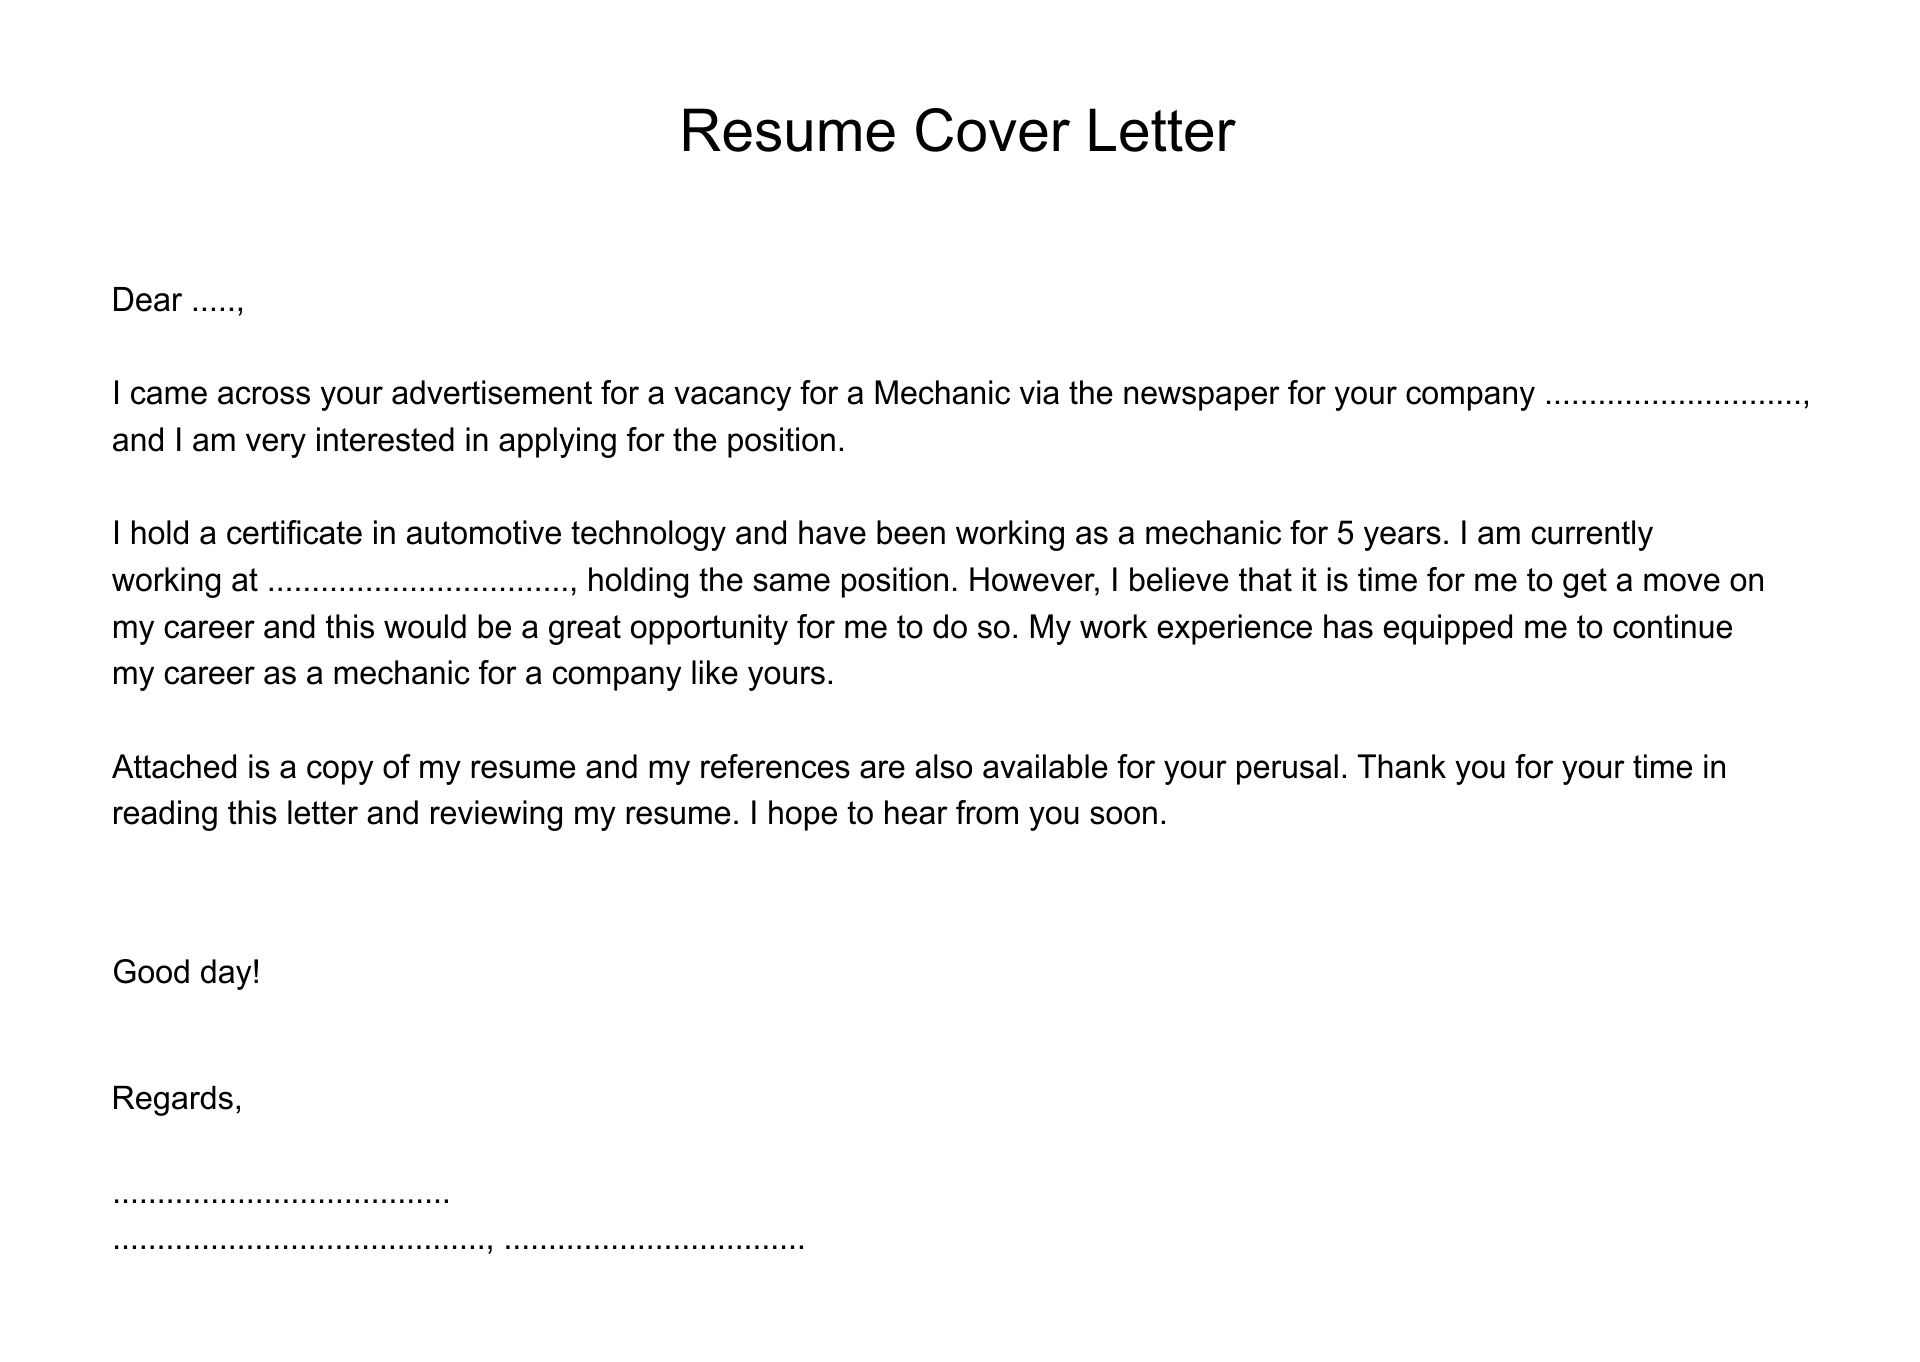 9-best-images-of-easy-cover-letter-free-printable-cover-letter